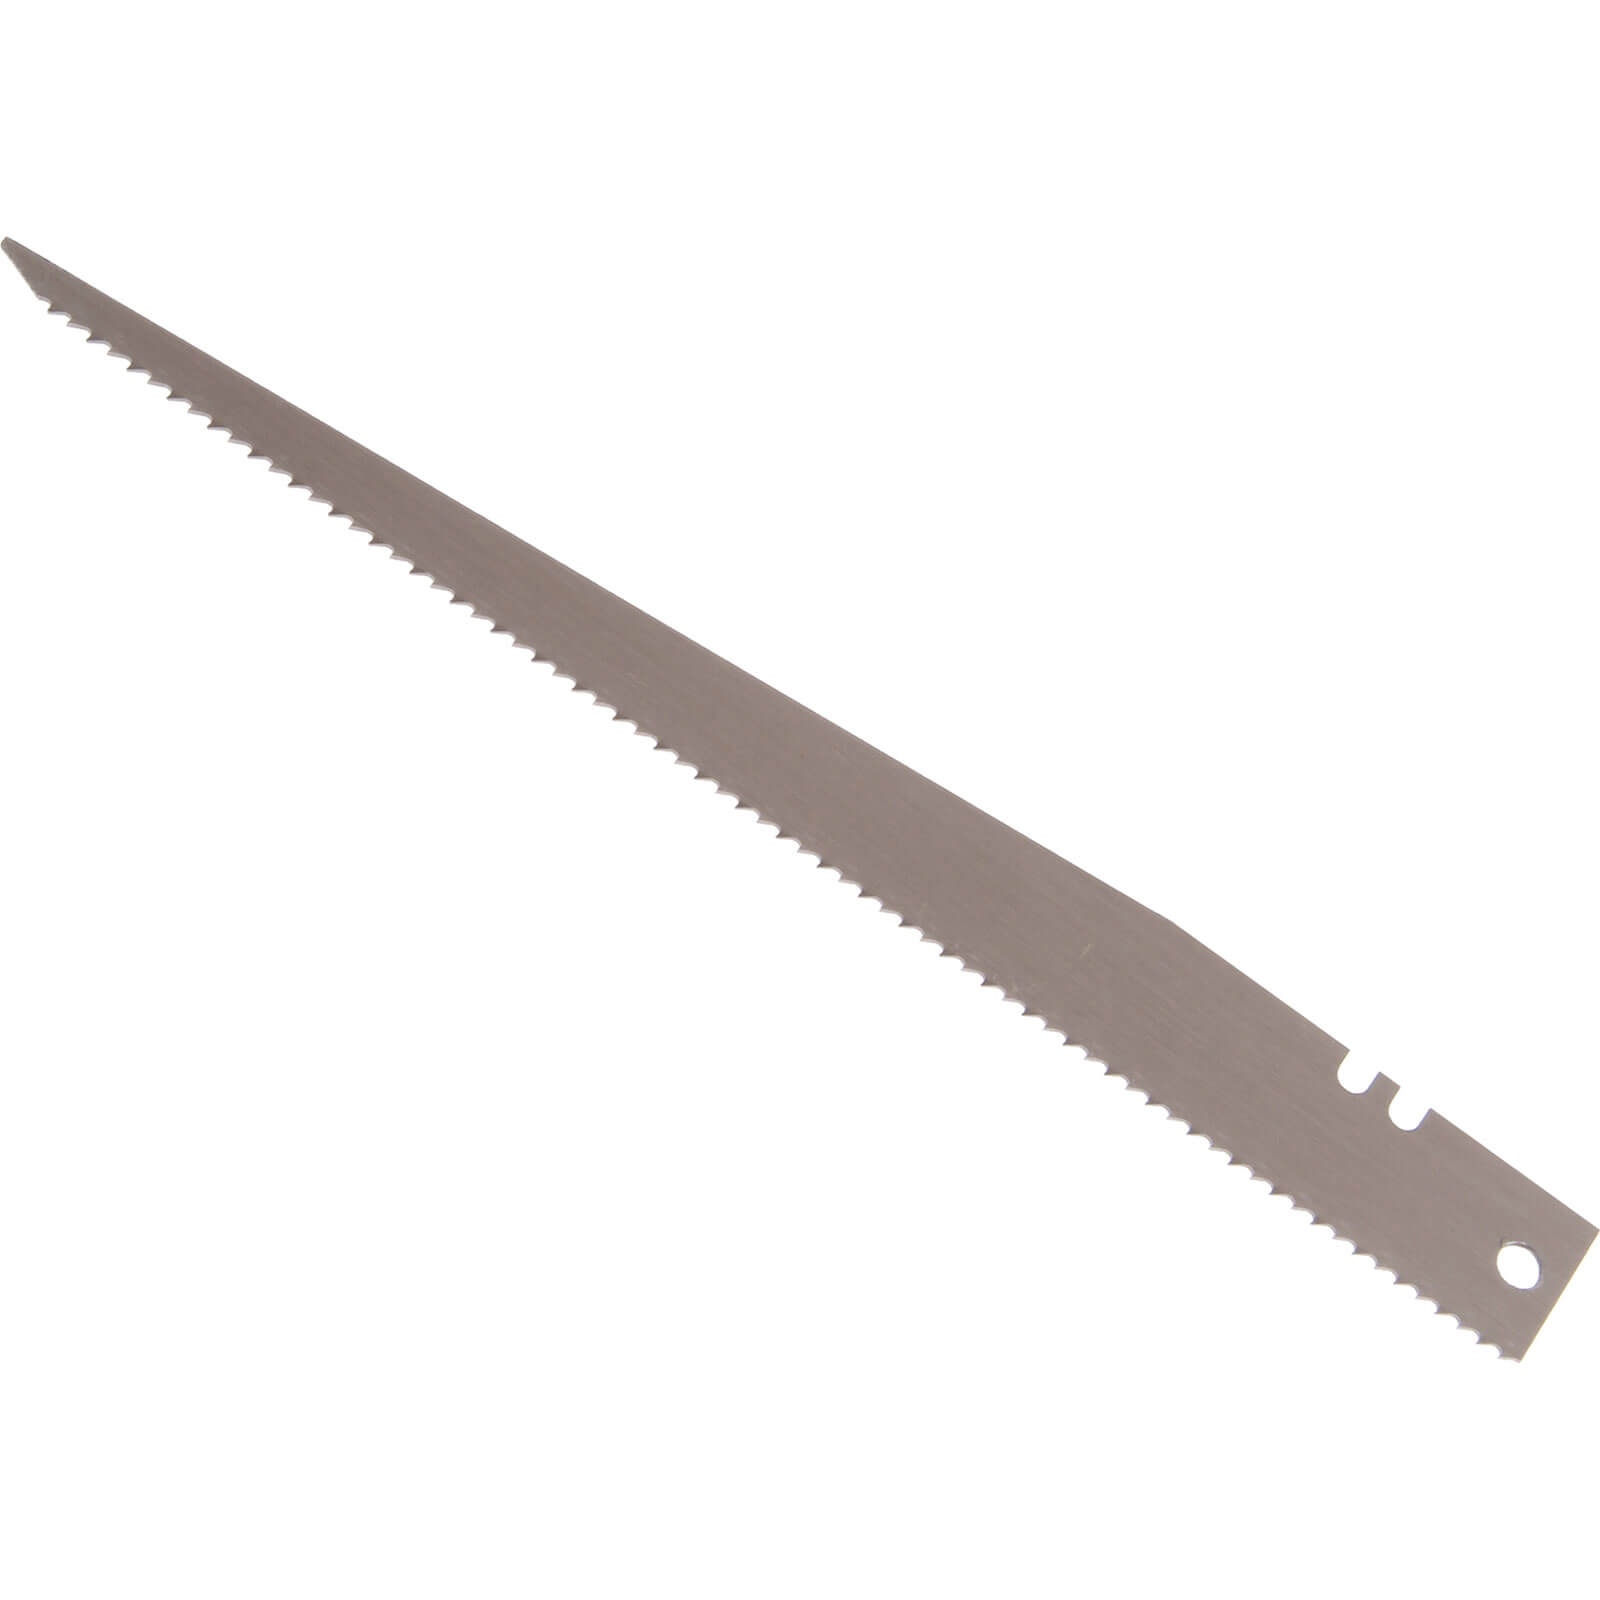 Photo of Stanley 1275b Saw Blade For Wood